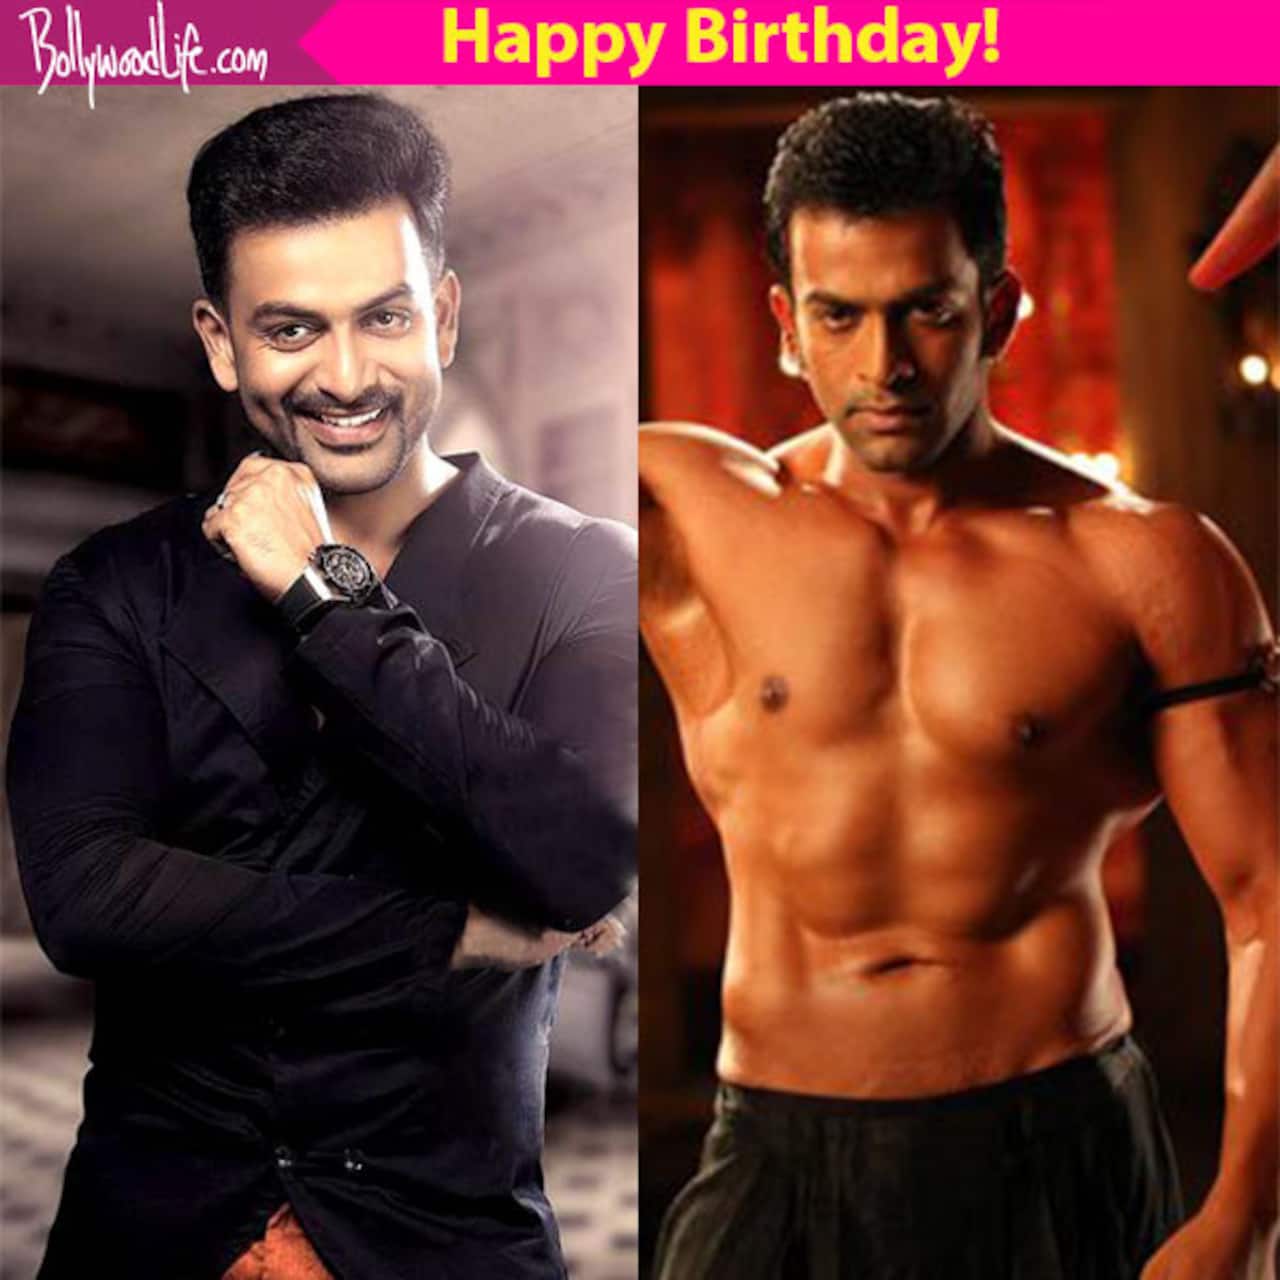 These 5 pictures prove that Prithviraj is undoubtedly the hottest Mallu star